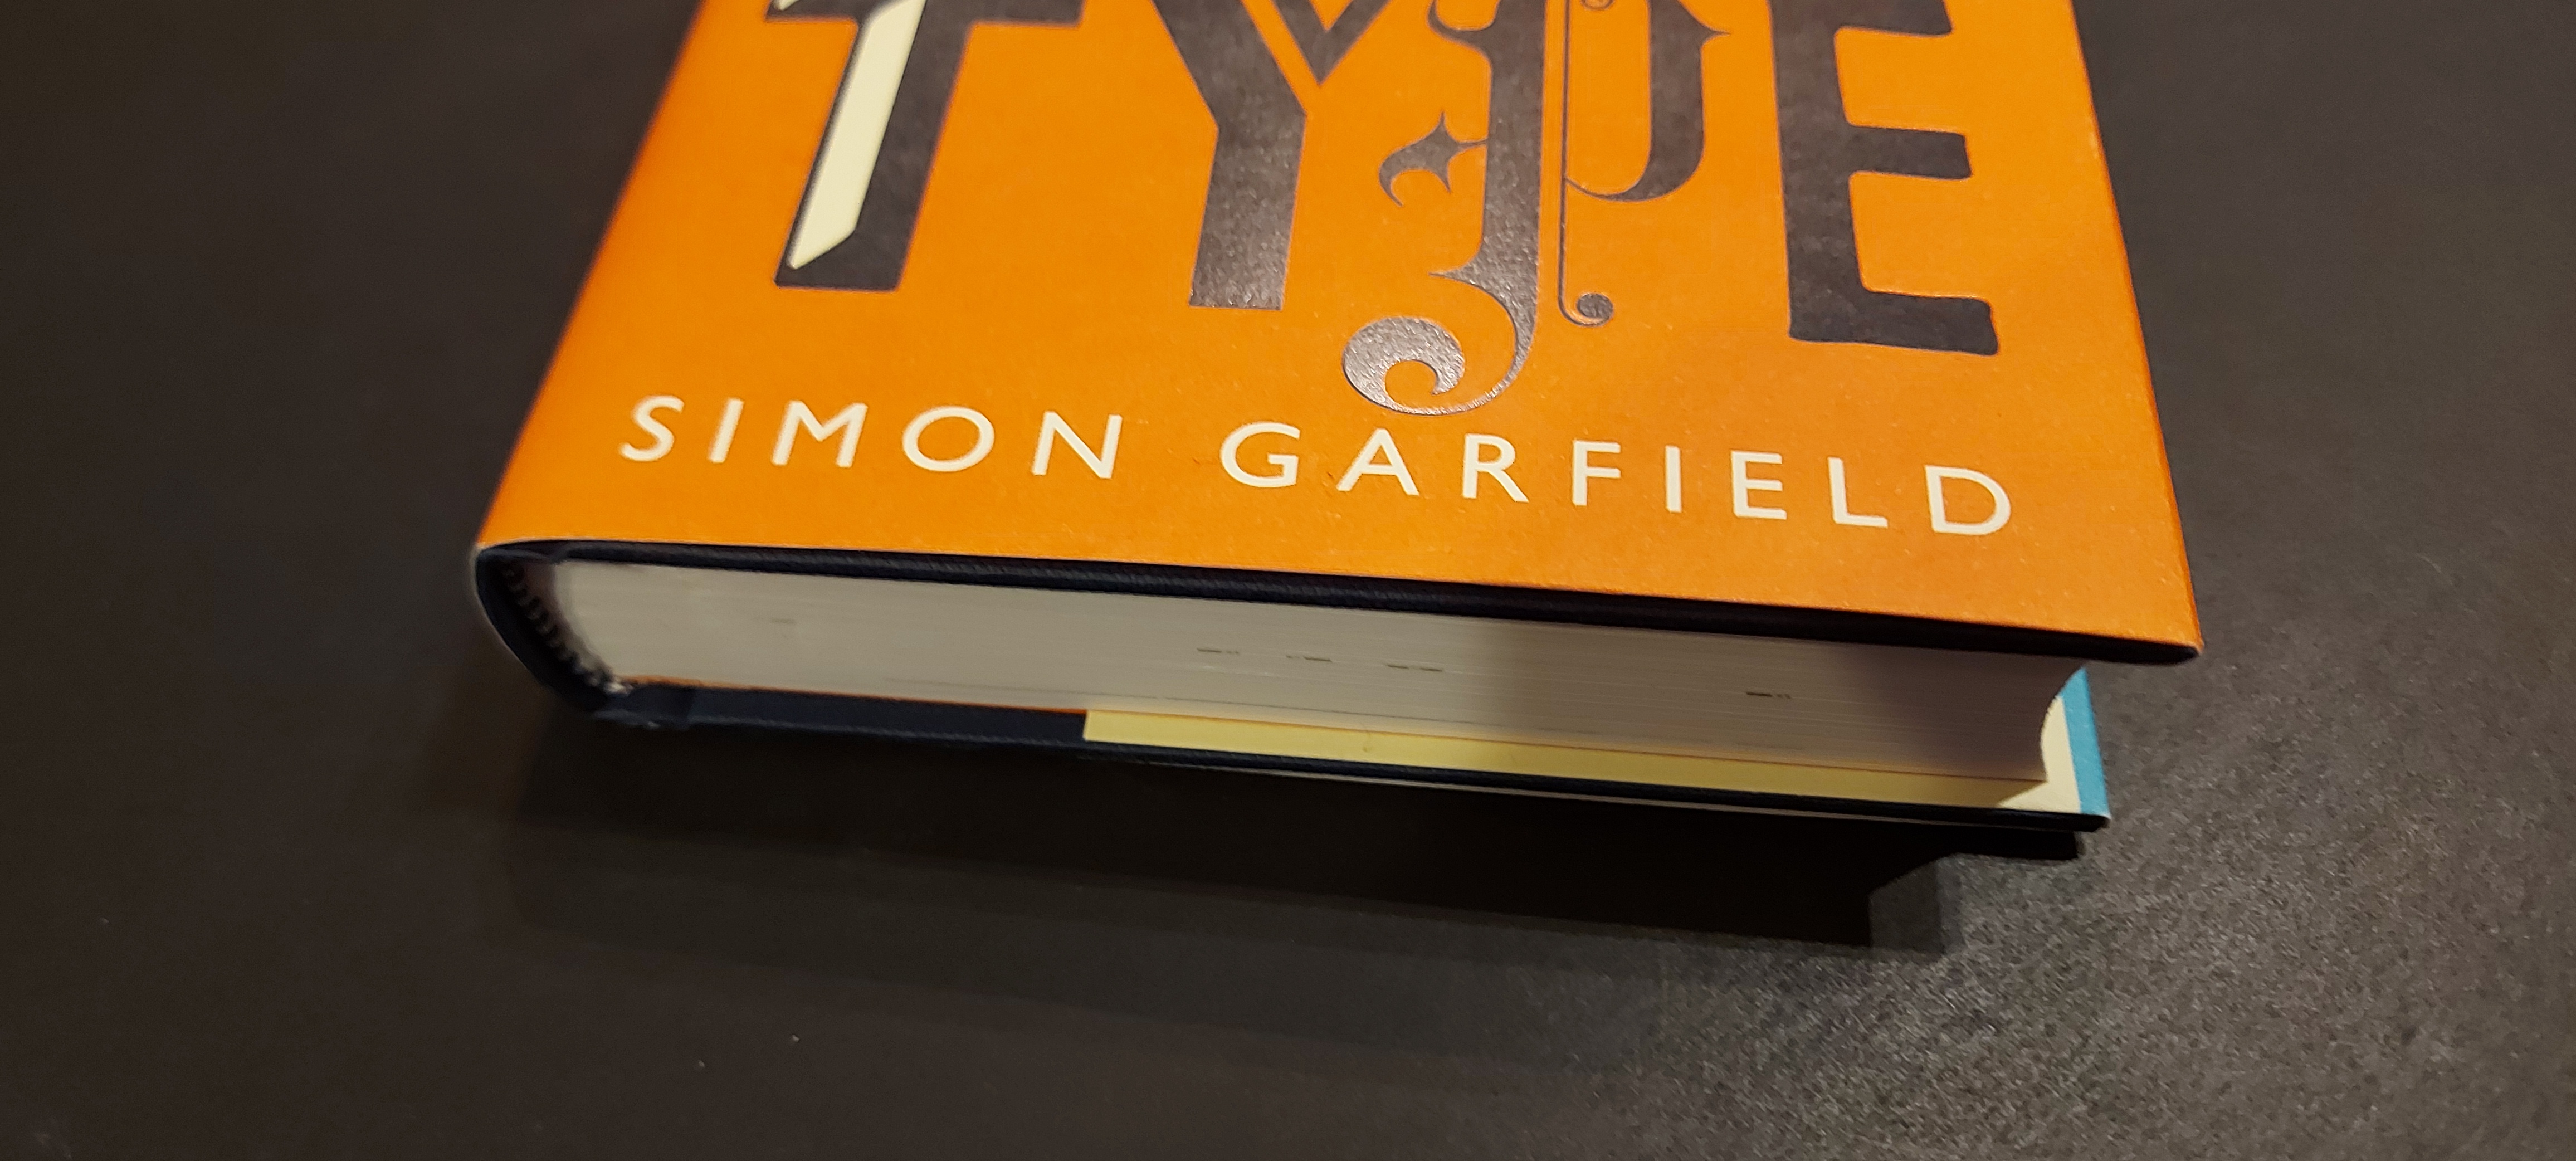 A　Mister-Seekers　Edition　Type:　(2010)　1st　by　Hardcover　Fonts　New　Book　Simon:　Garfield,　about　My　Just　Books